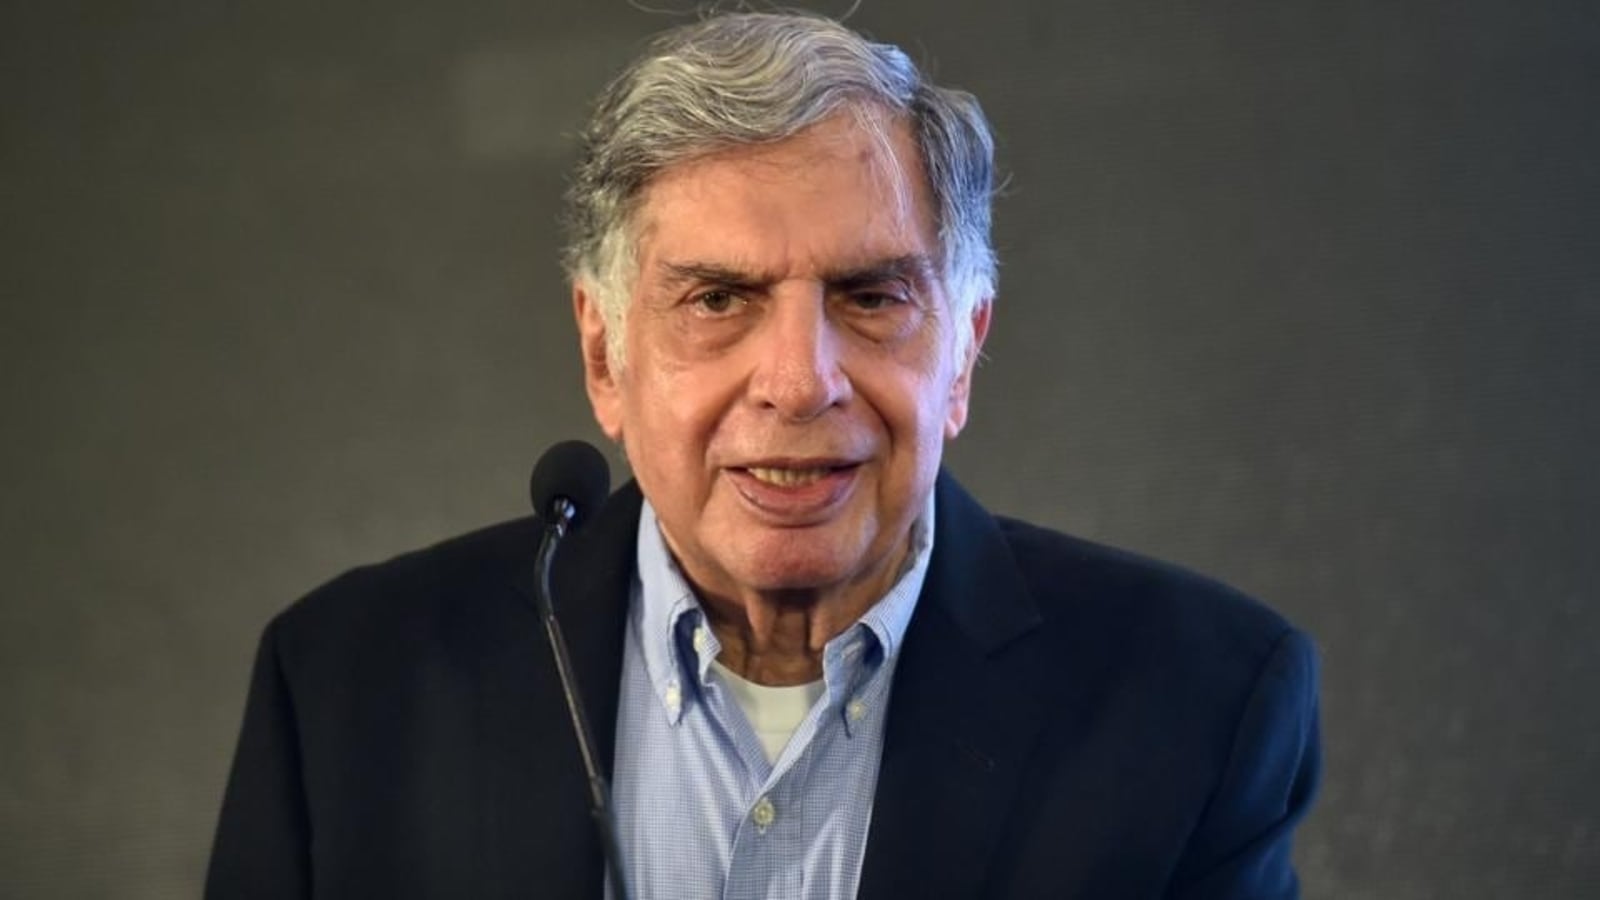 Ratan Tata backs startup that connects senior citizens with young graduates, promotes inter-generational friendships